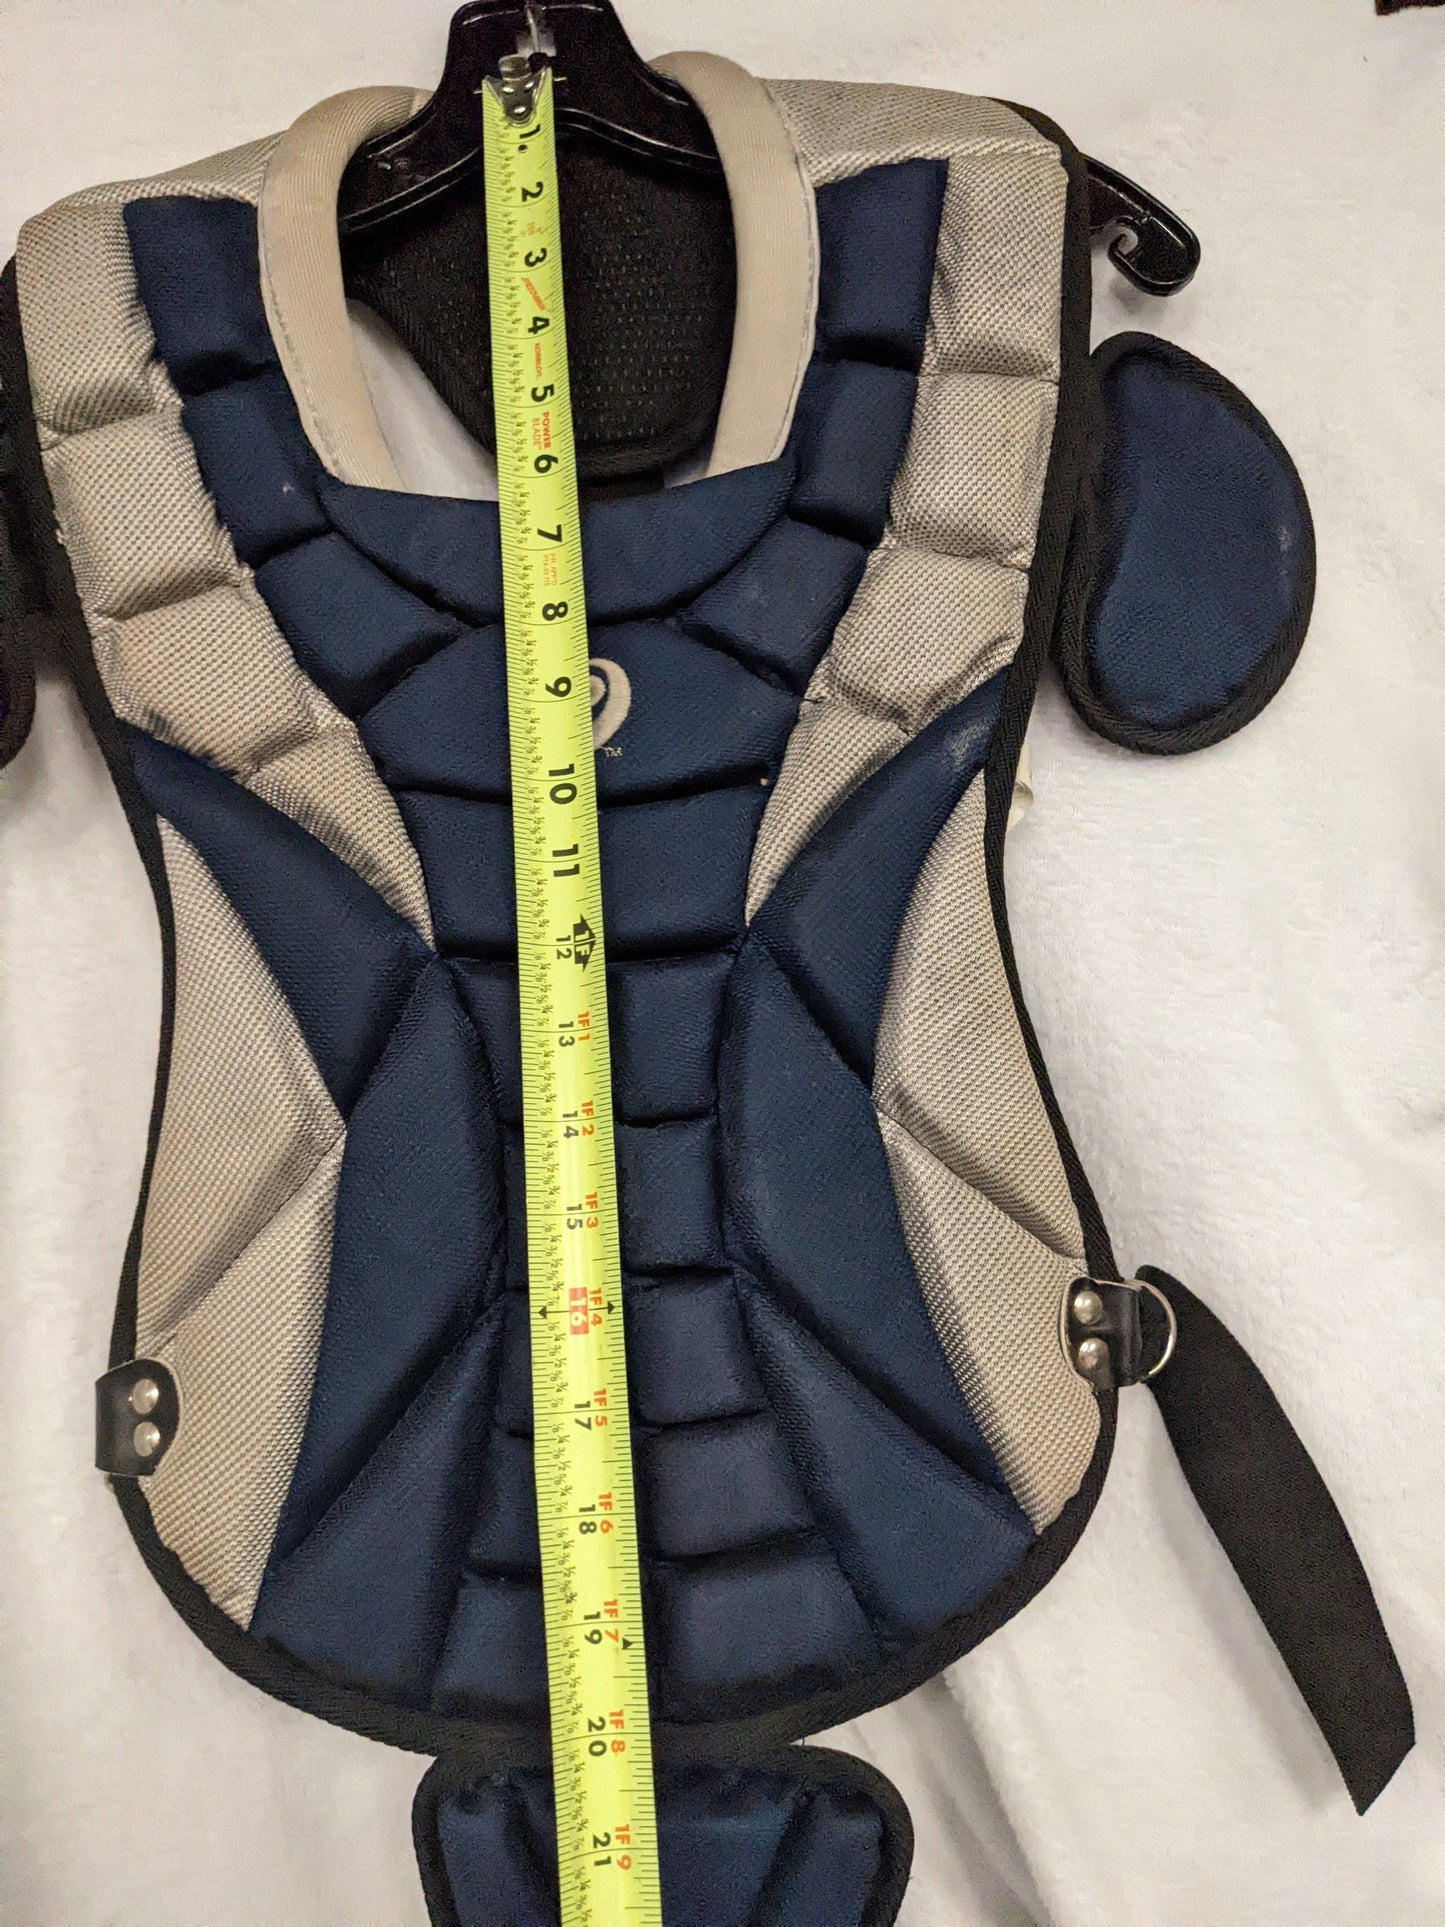 Pronine Baseball/Softball Catcher's Chest Protector Size Medium Color Blue Condition Used